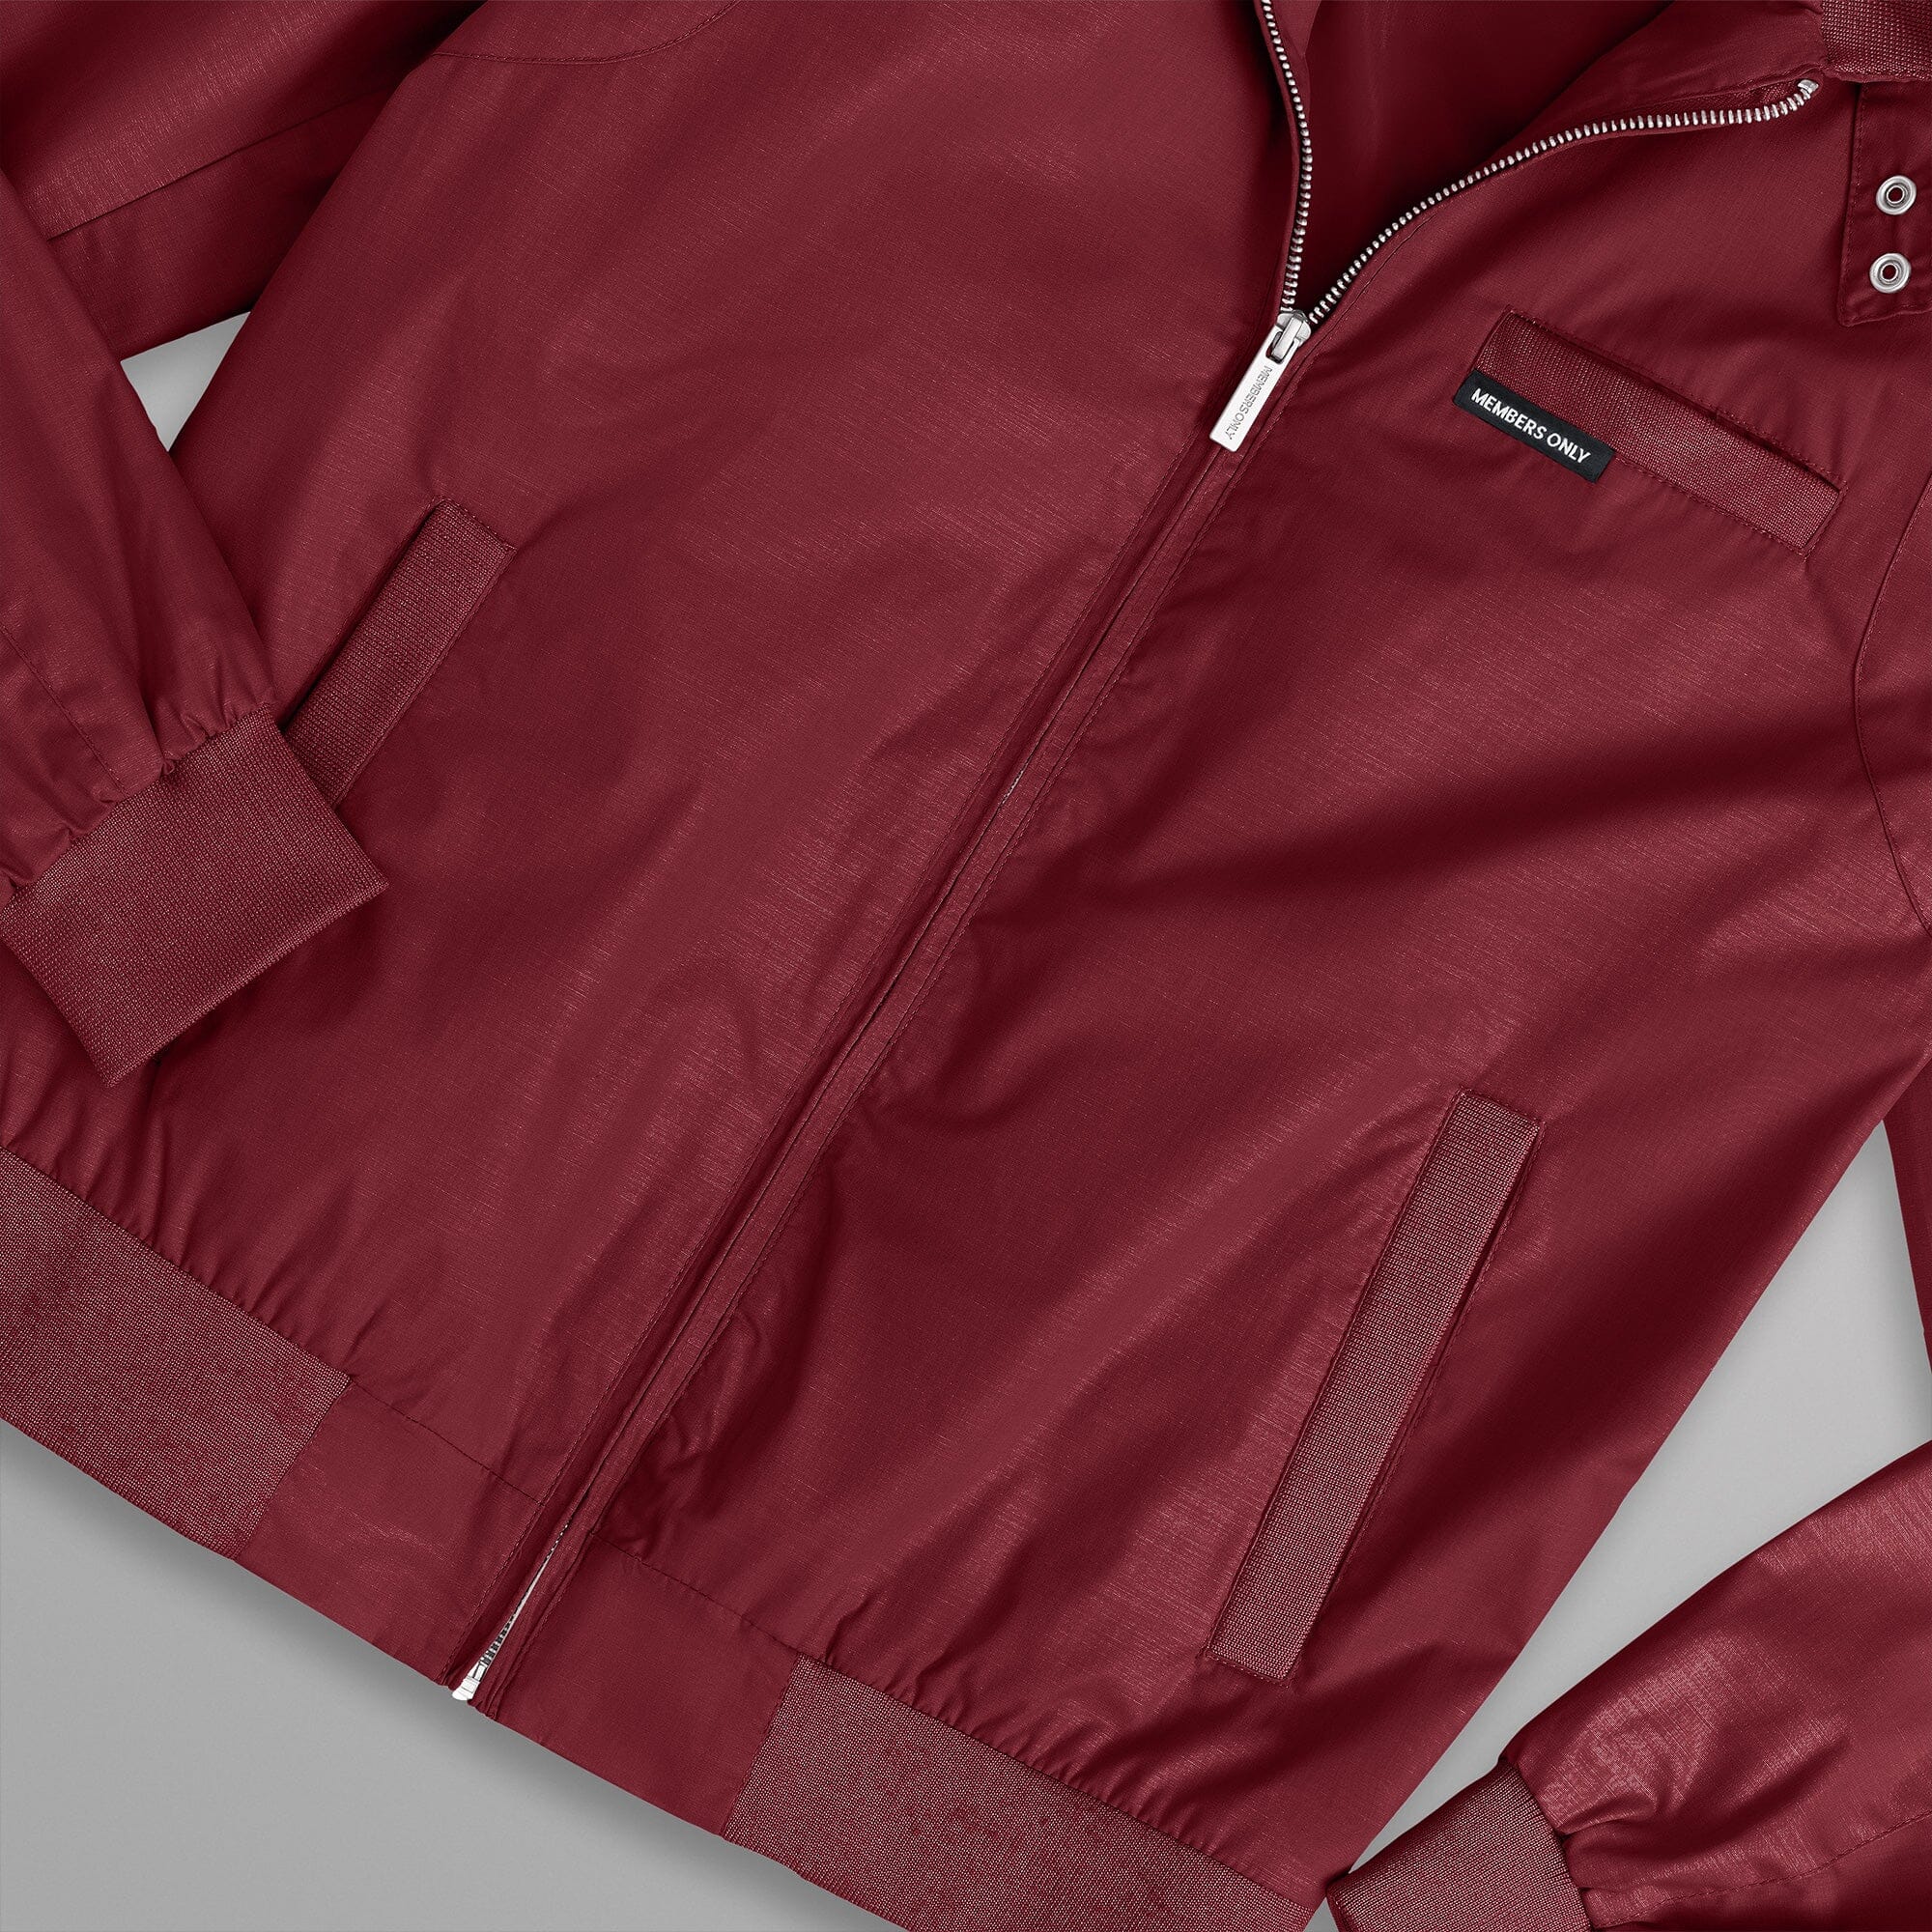 Vintage 80's Iconic Maroon Bomber Jacket by Members Only